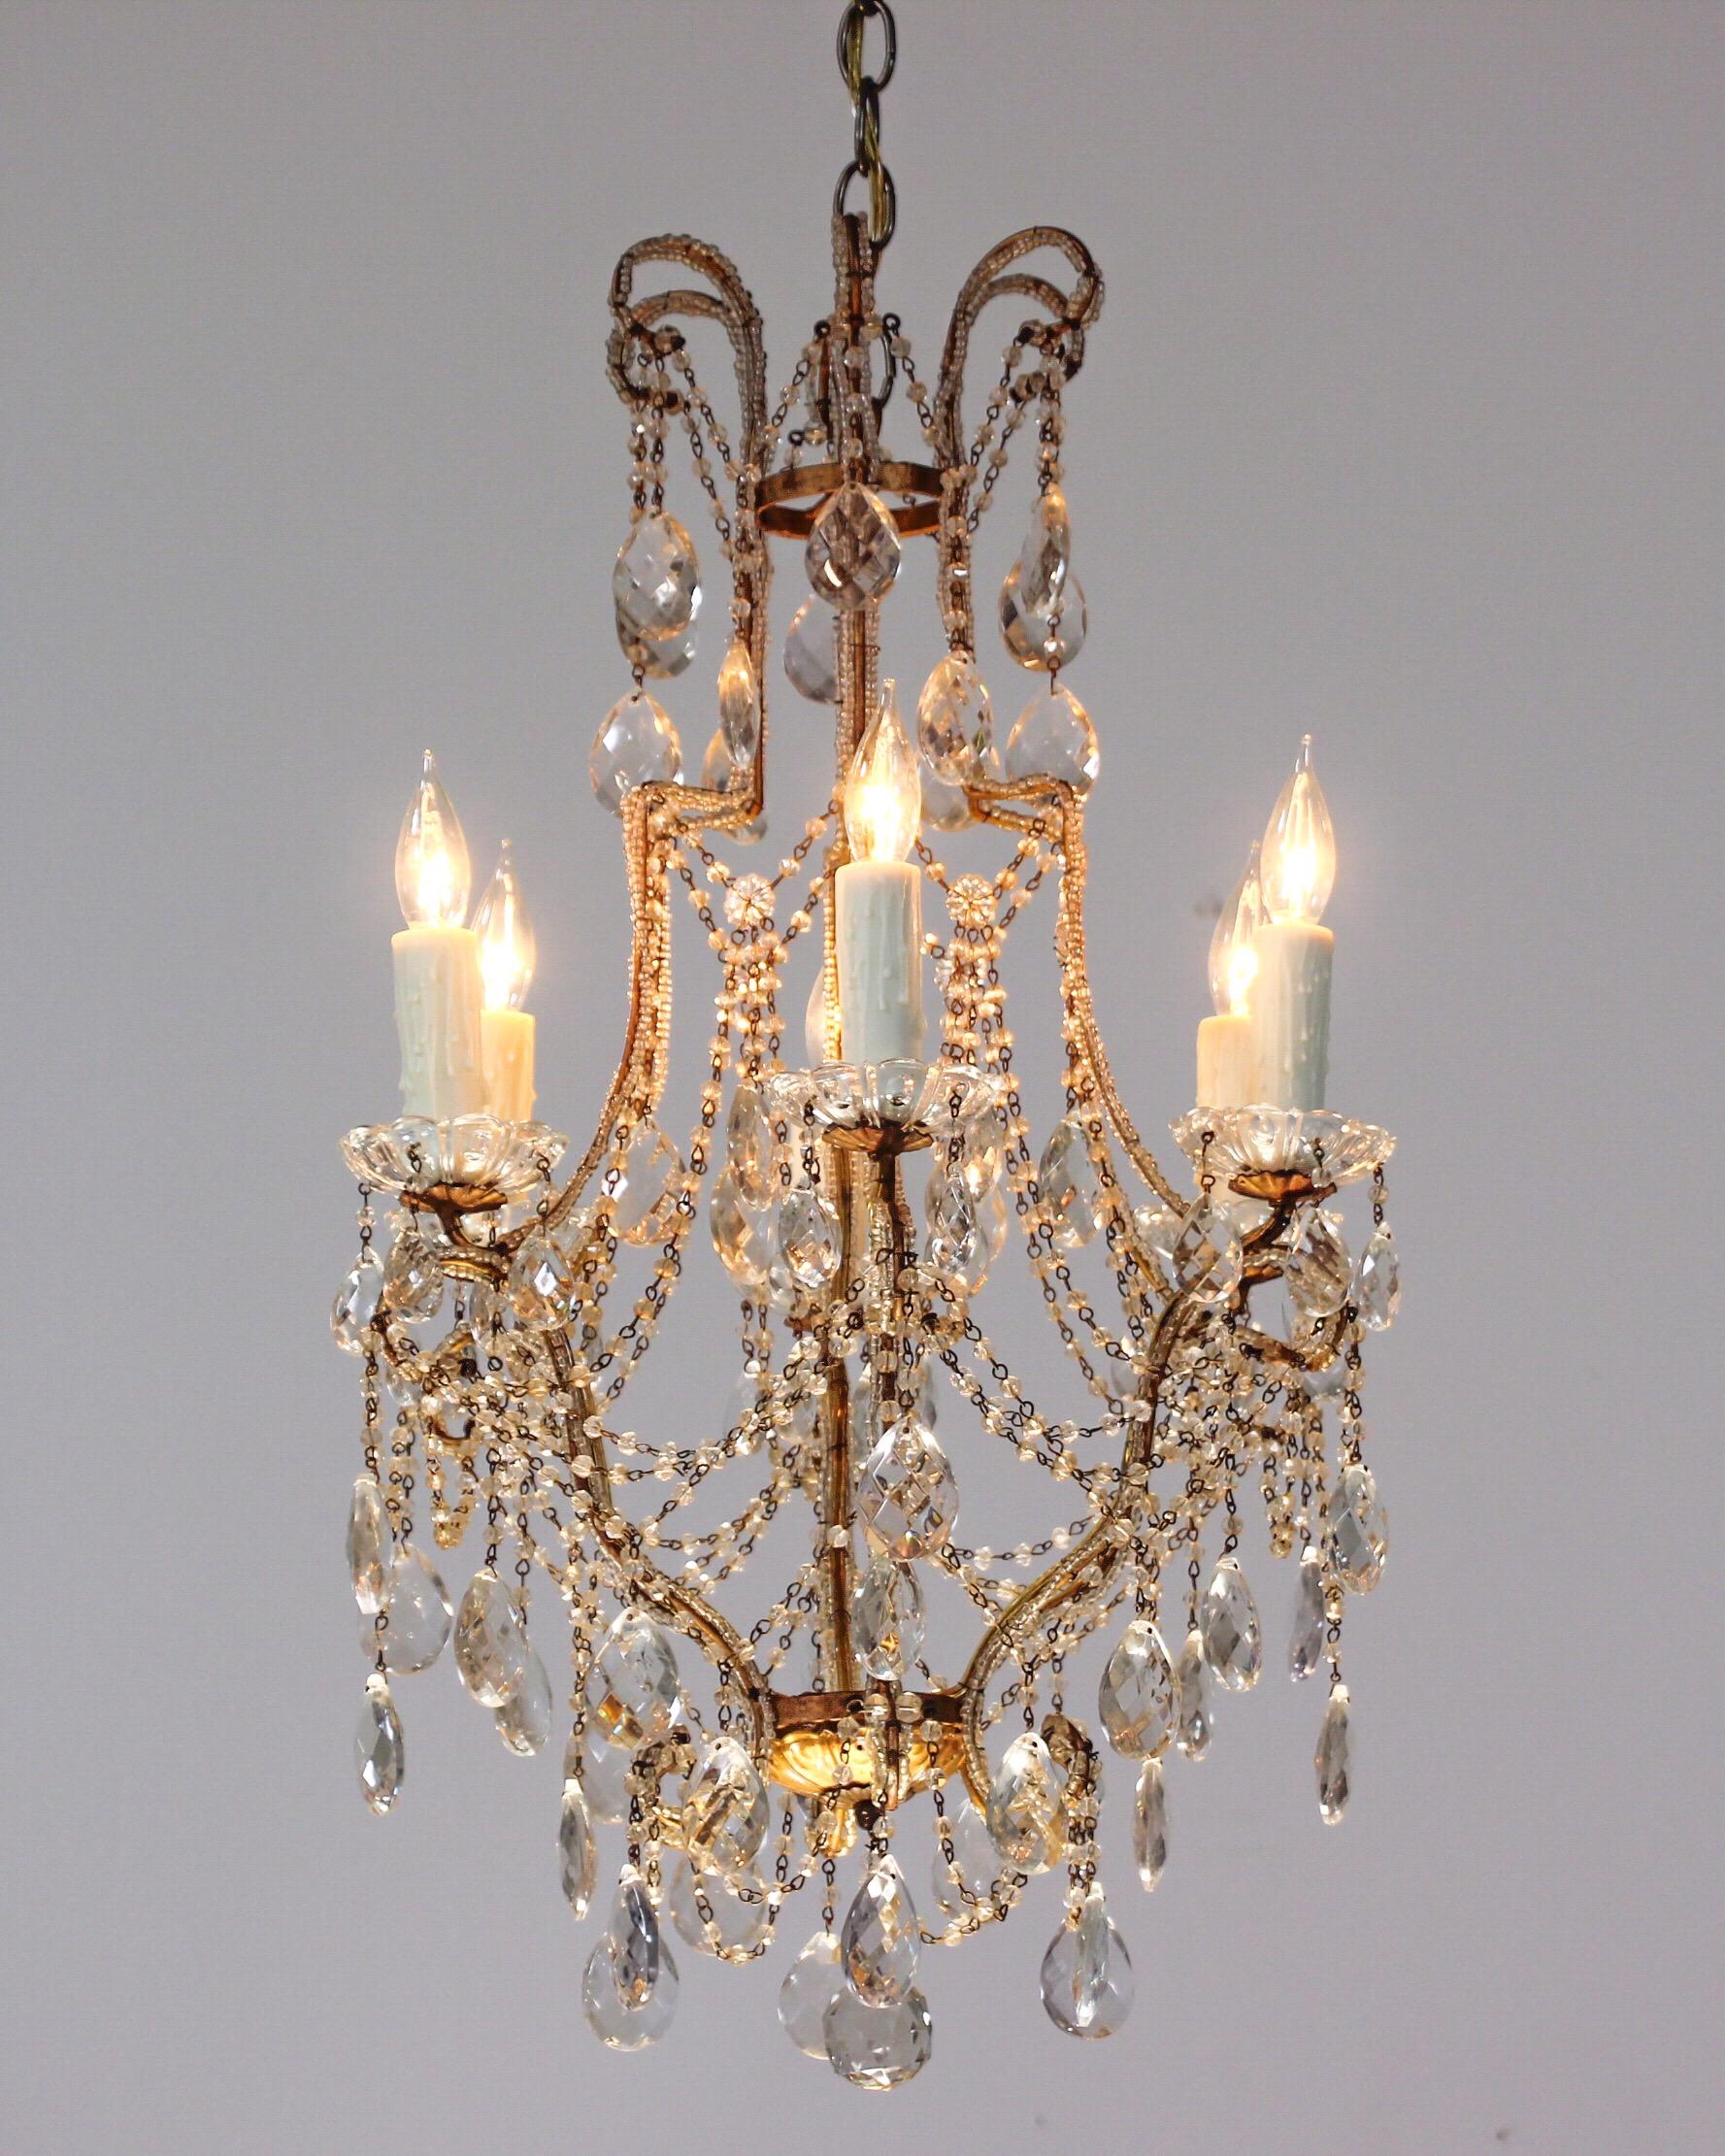      1940s Italian gilt iron chandelier consisting of a crystal beaded gilt-iron frame with faceted prisms and “English cut” bead garlands. 
     Very pretty and delicate in shape, the chandelier would look wonderful in a powder room .
     Wired